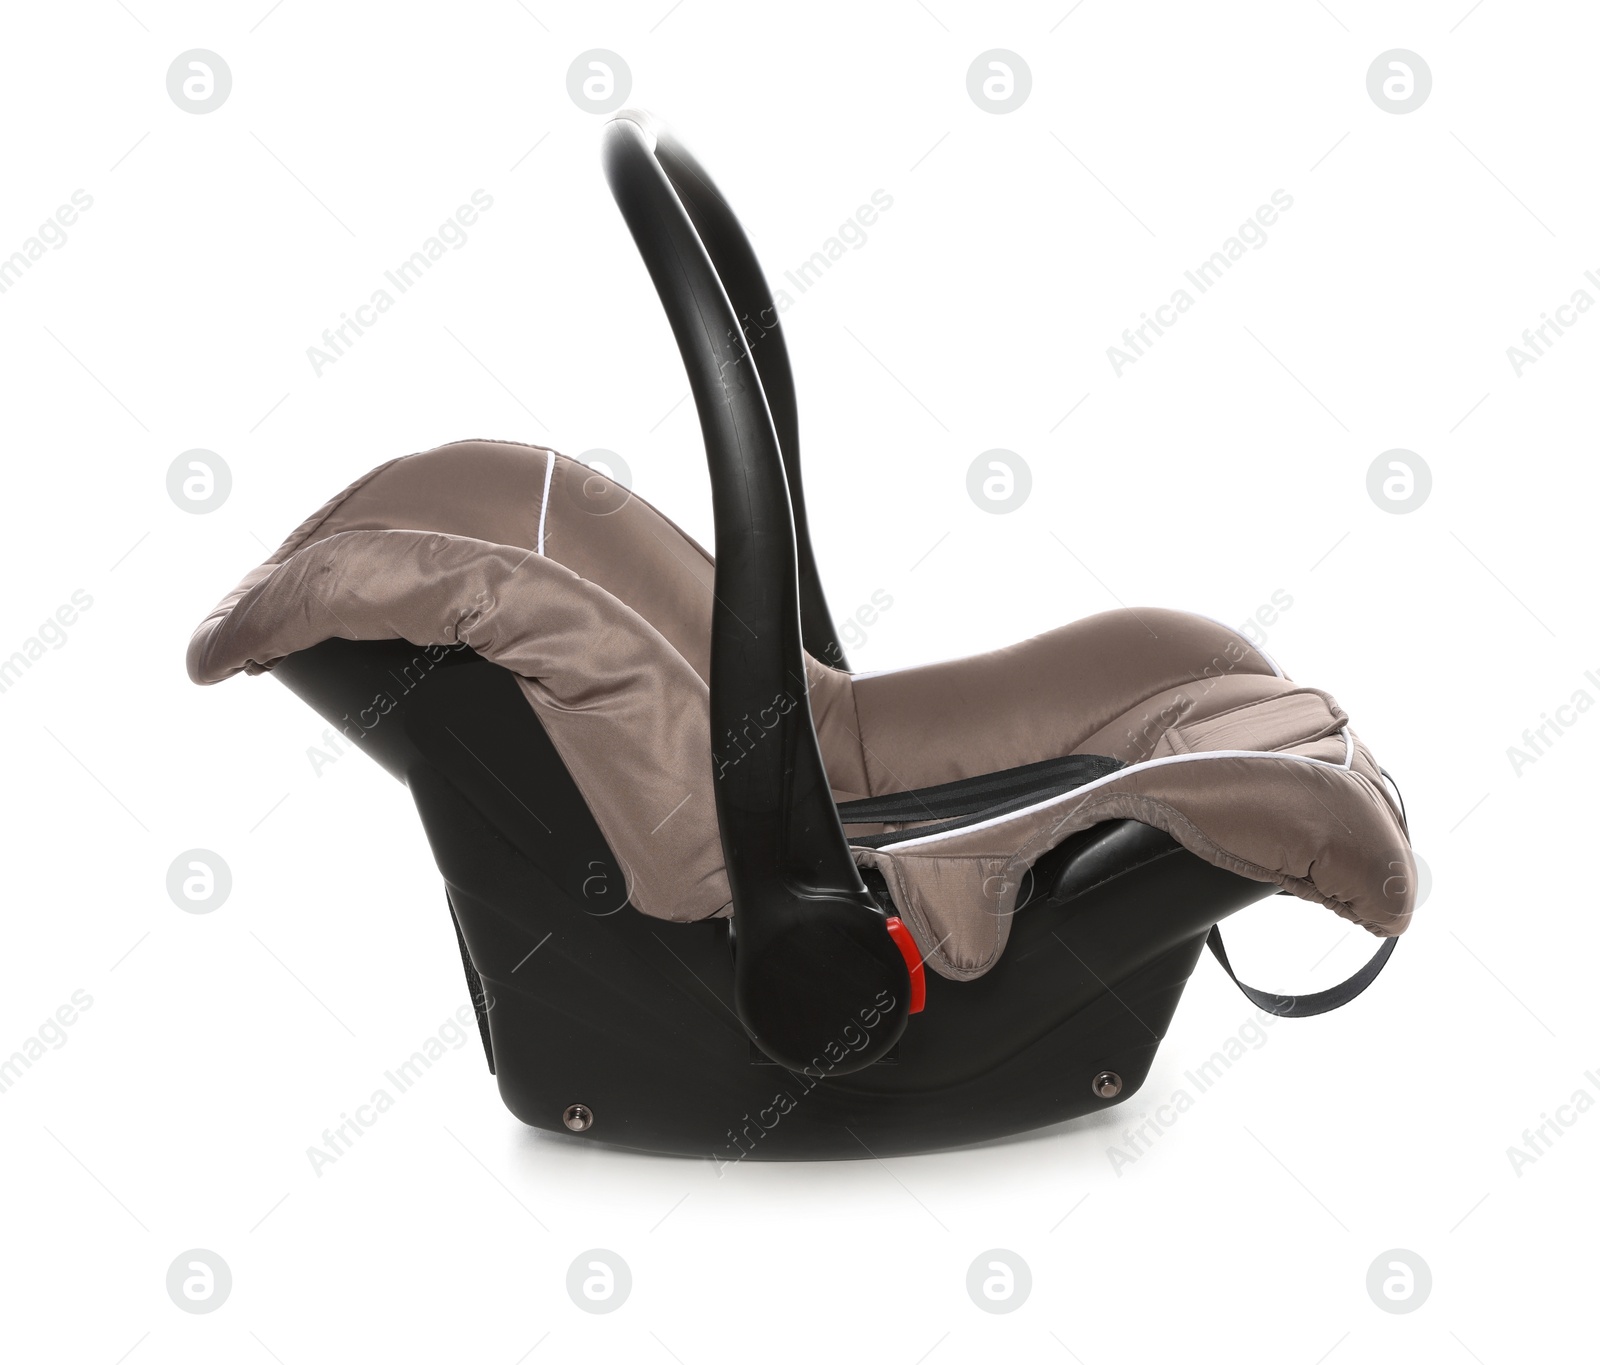 Photo of Brown child safety seat on white background